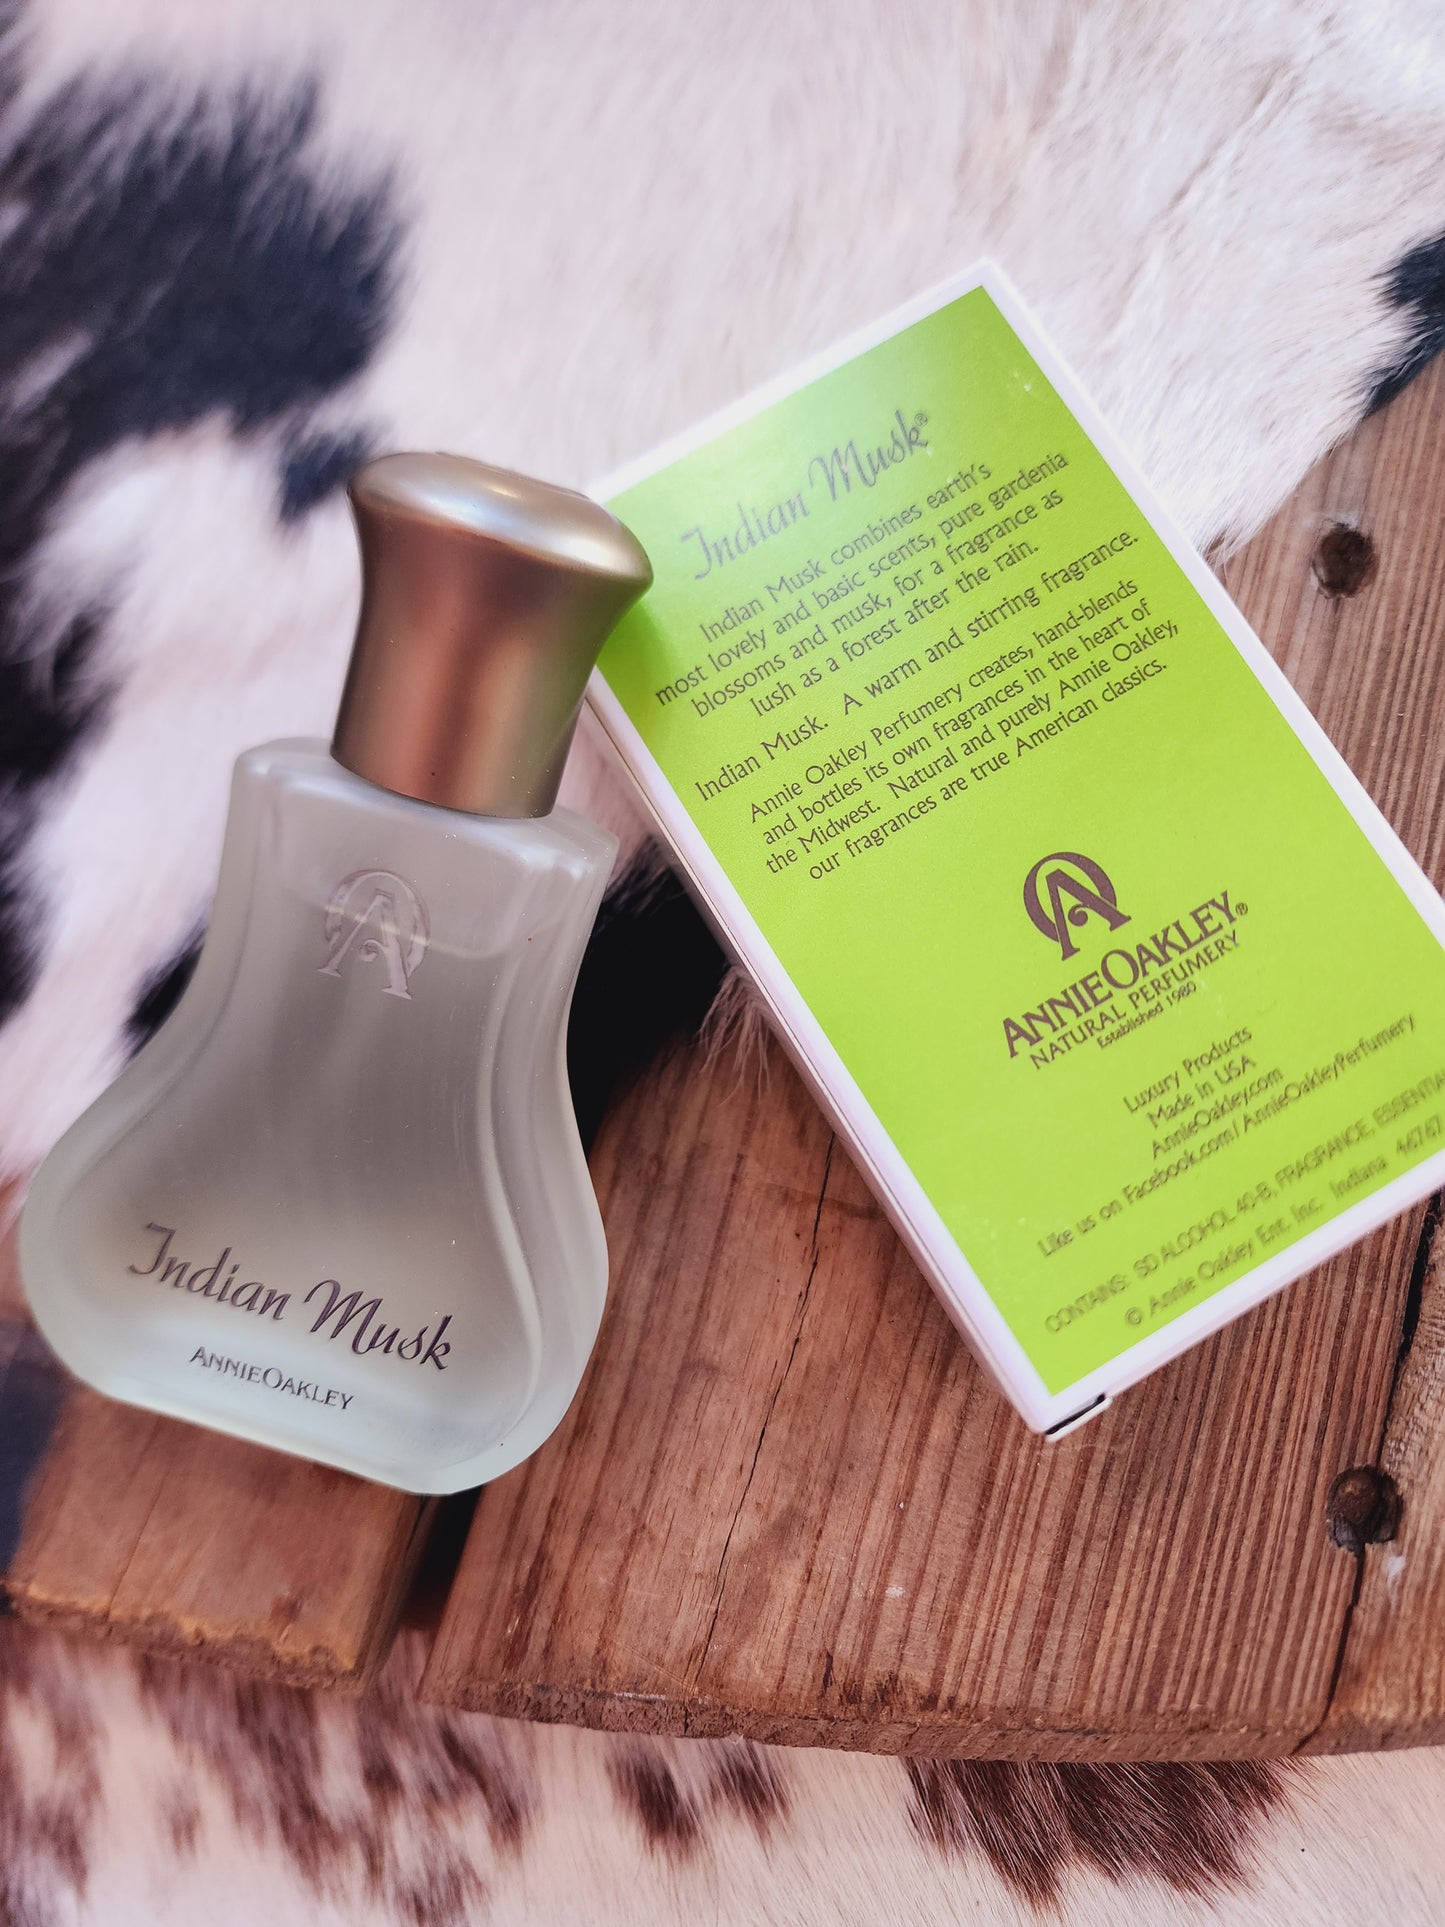 Indian Musk - Annie Oakley Women’s Natural perfume